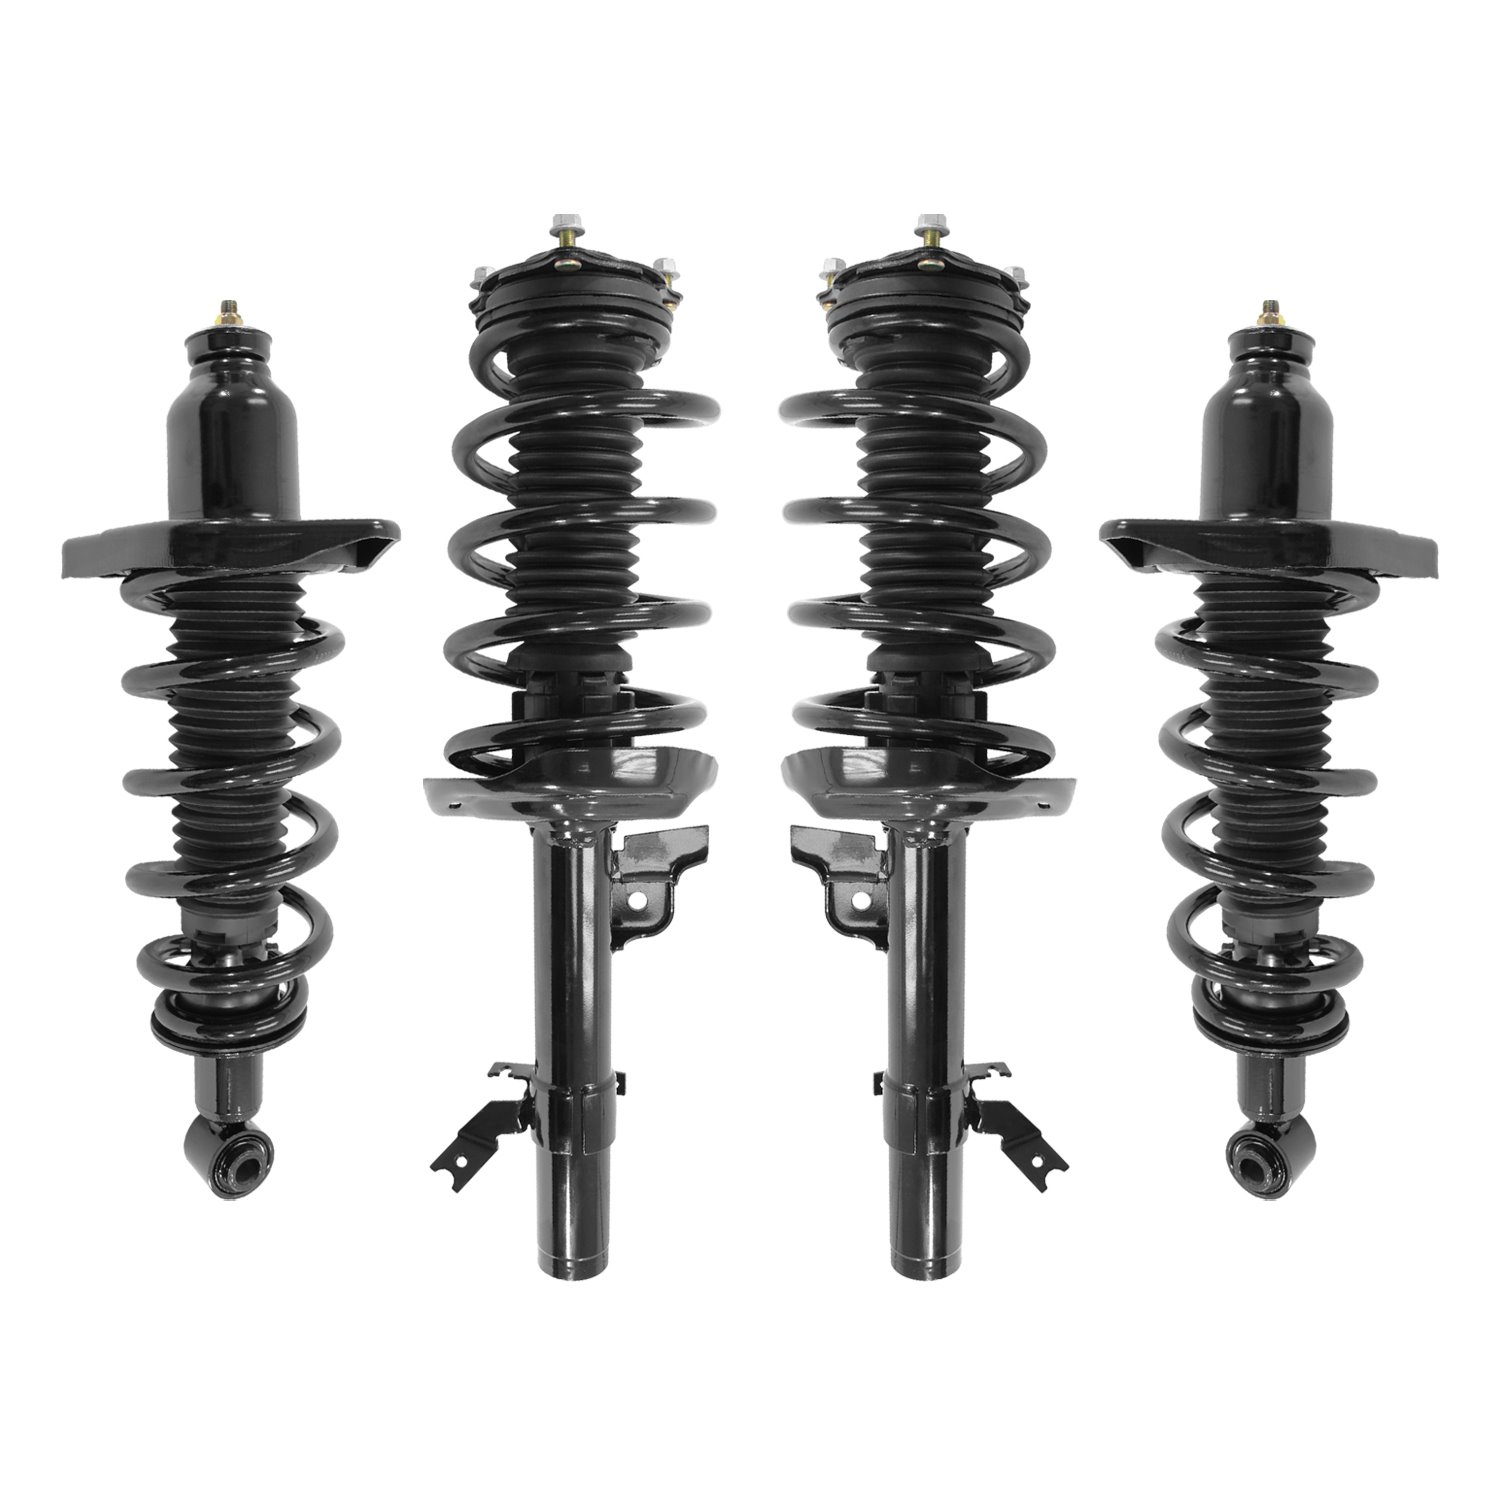 4-13251-16073-001 Front & Rear Suspension Strut & Coil Spring Assembly Kit Fits Select Acura MDX